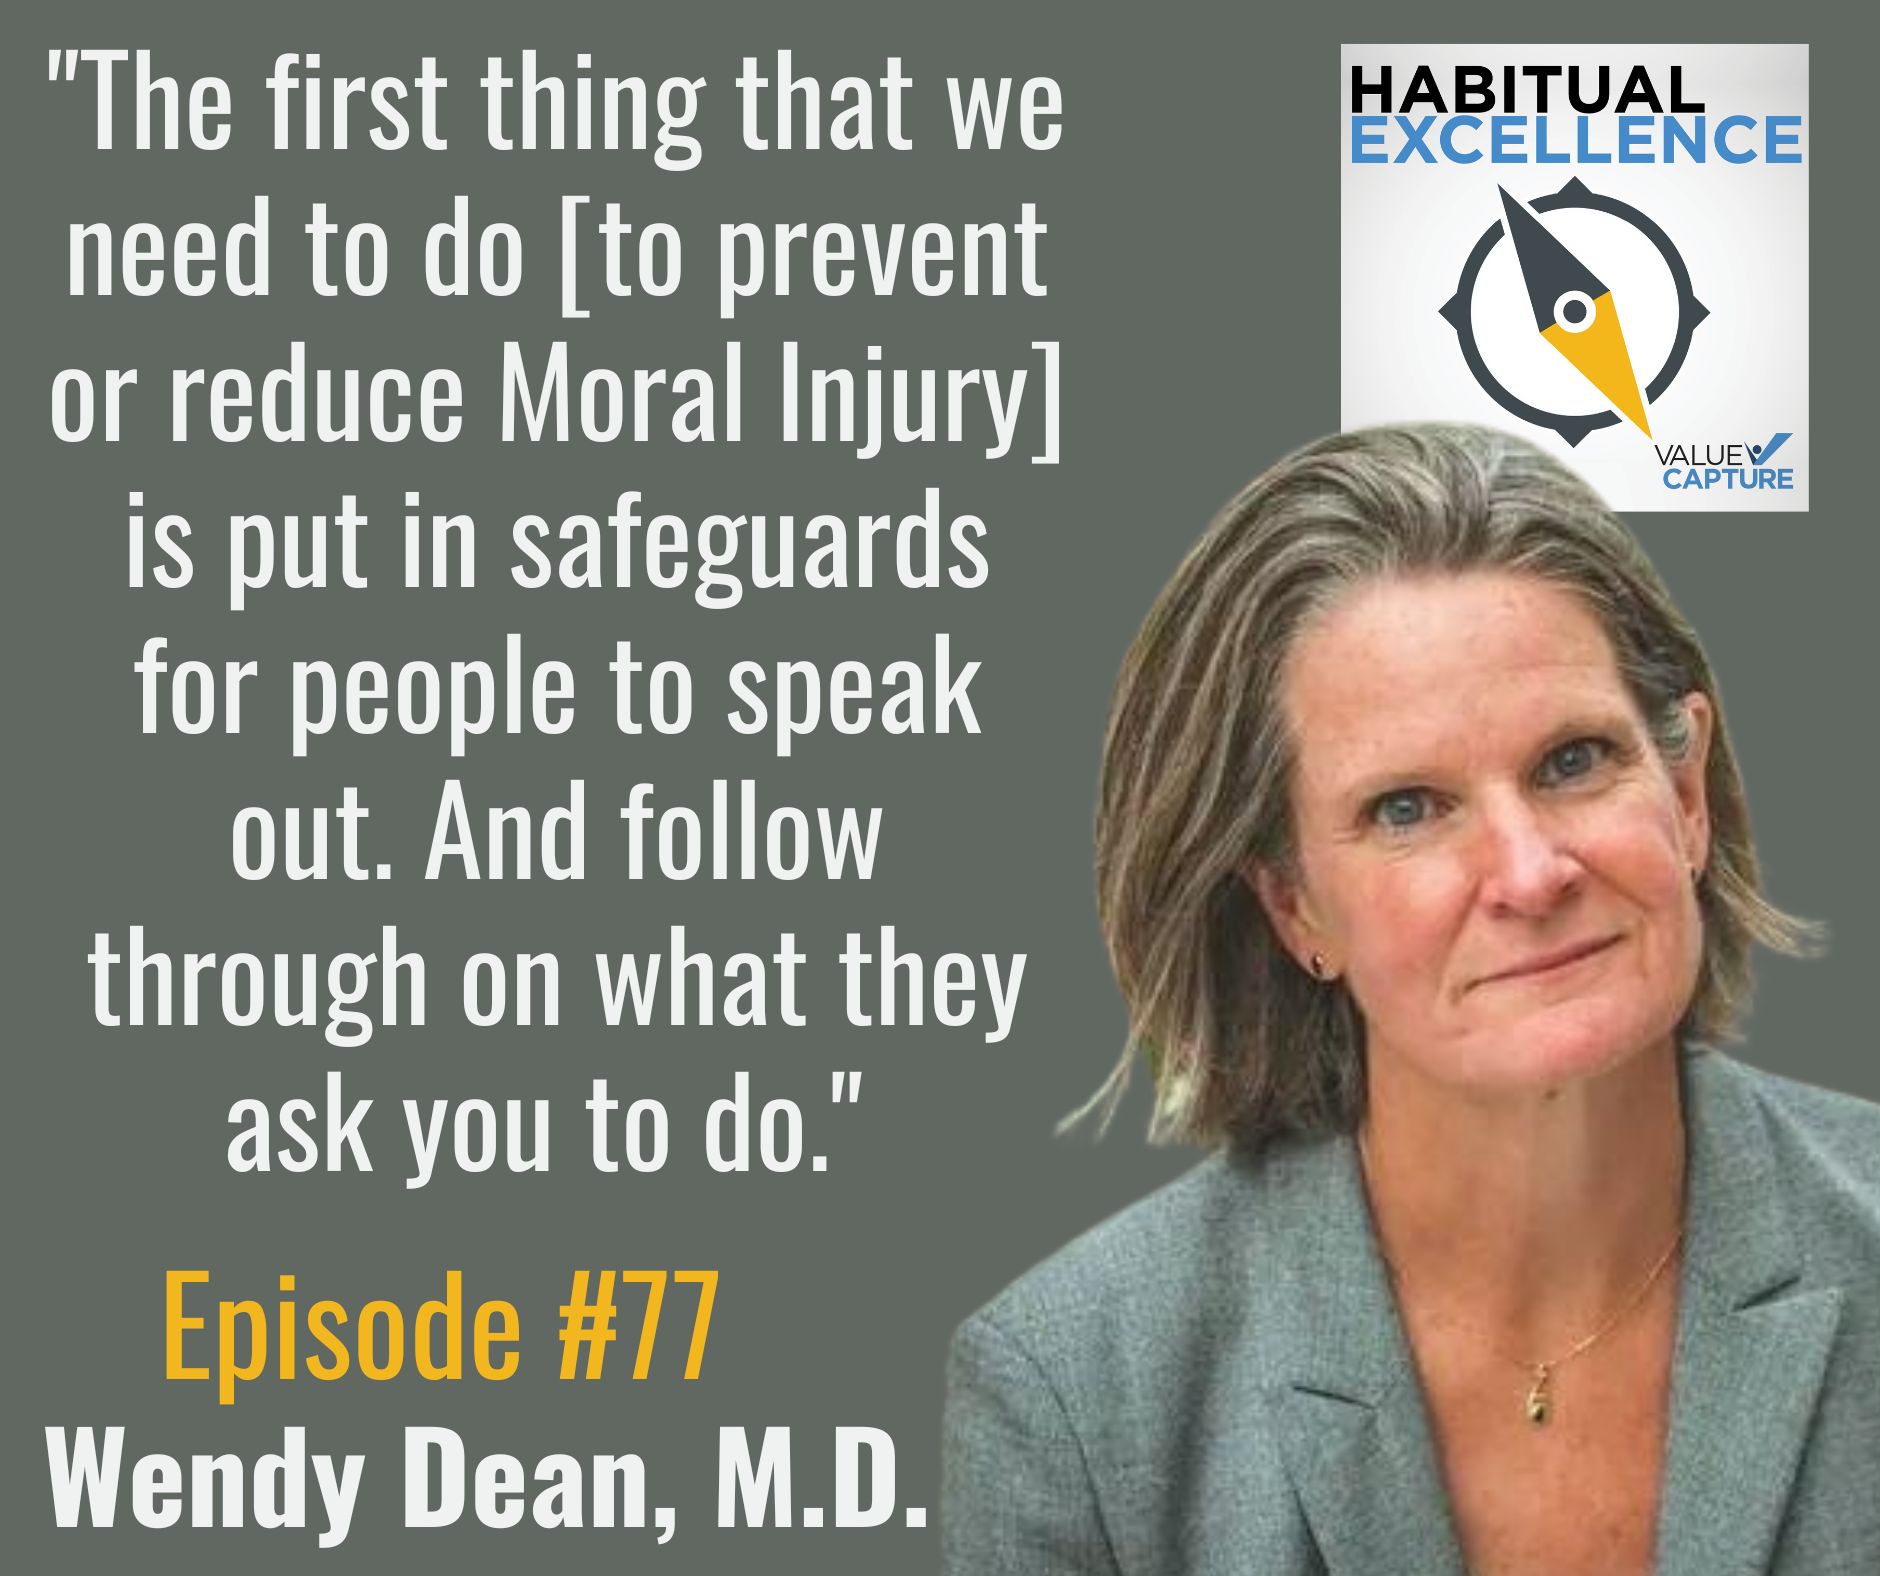 "The first thing that we need to do [to prevent or reduce Moral Injury] is put in safeguards for people to speak out. And follow through on what they ask you to do."  Dr. Wendy Dean